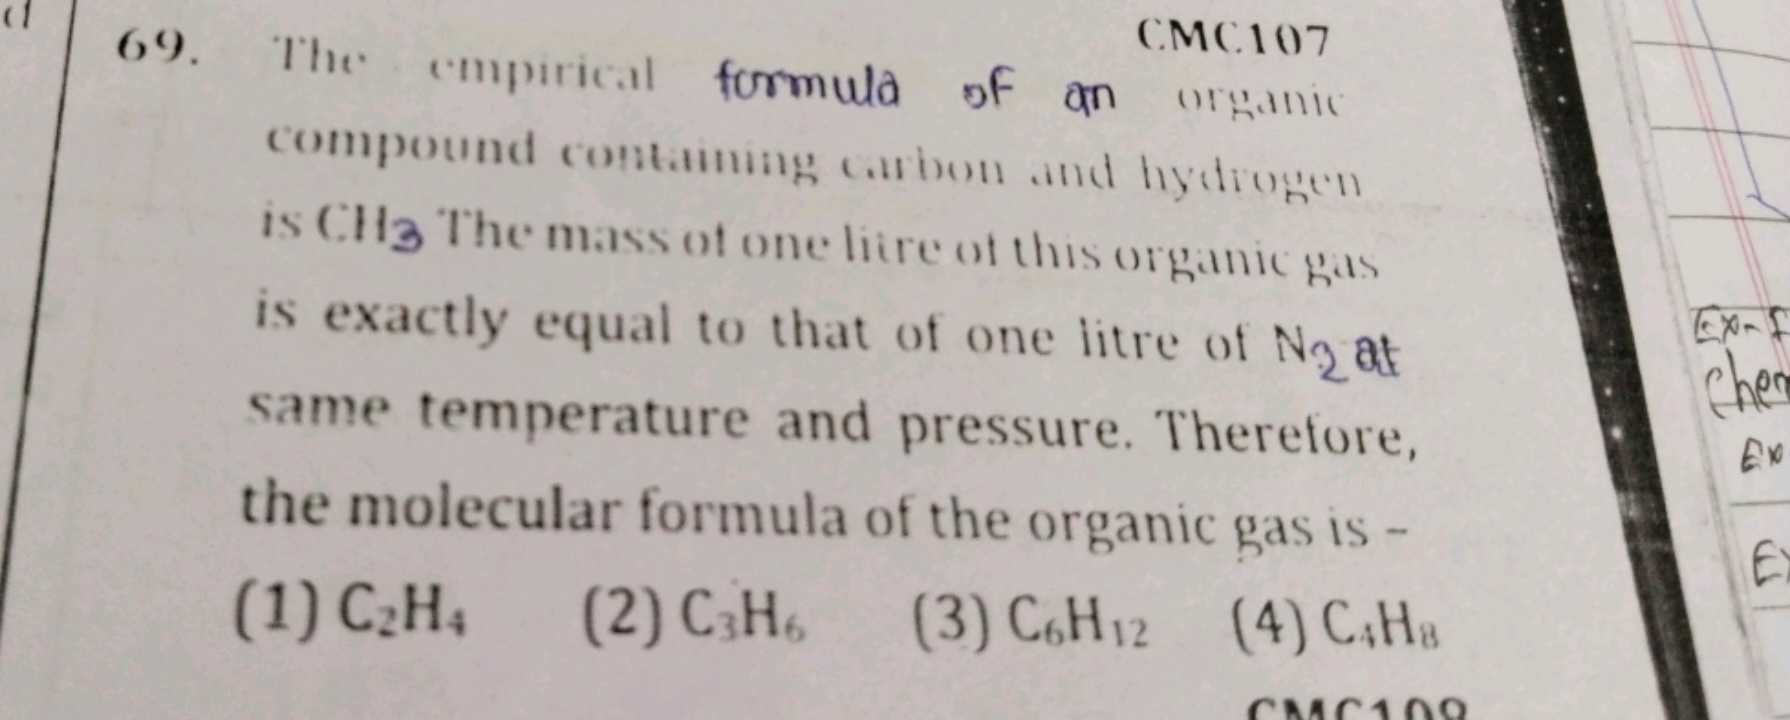 The emprical formula of an CMC.107 compound comtaming c.ubon and hydro